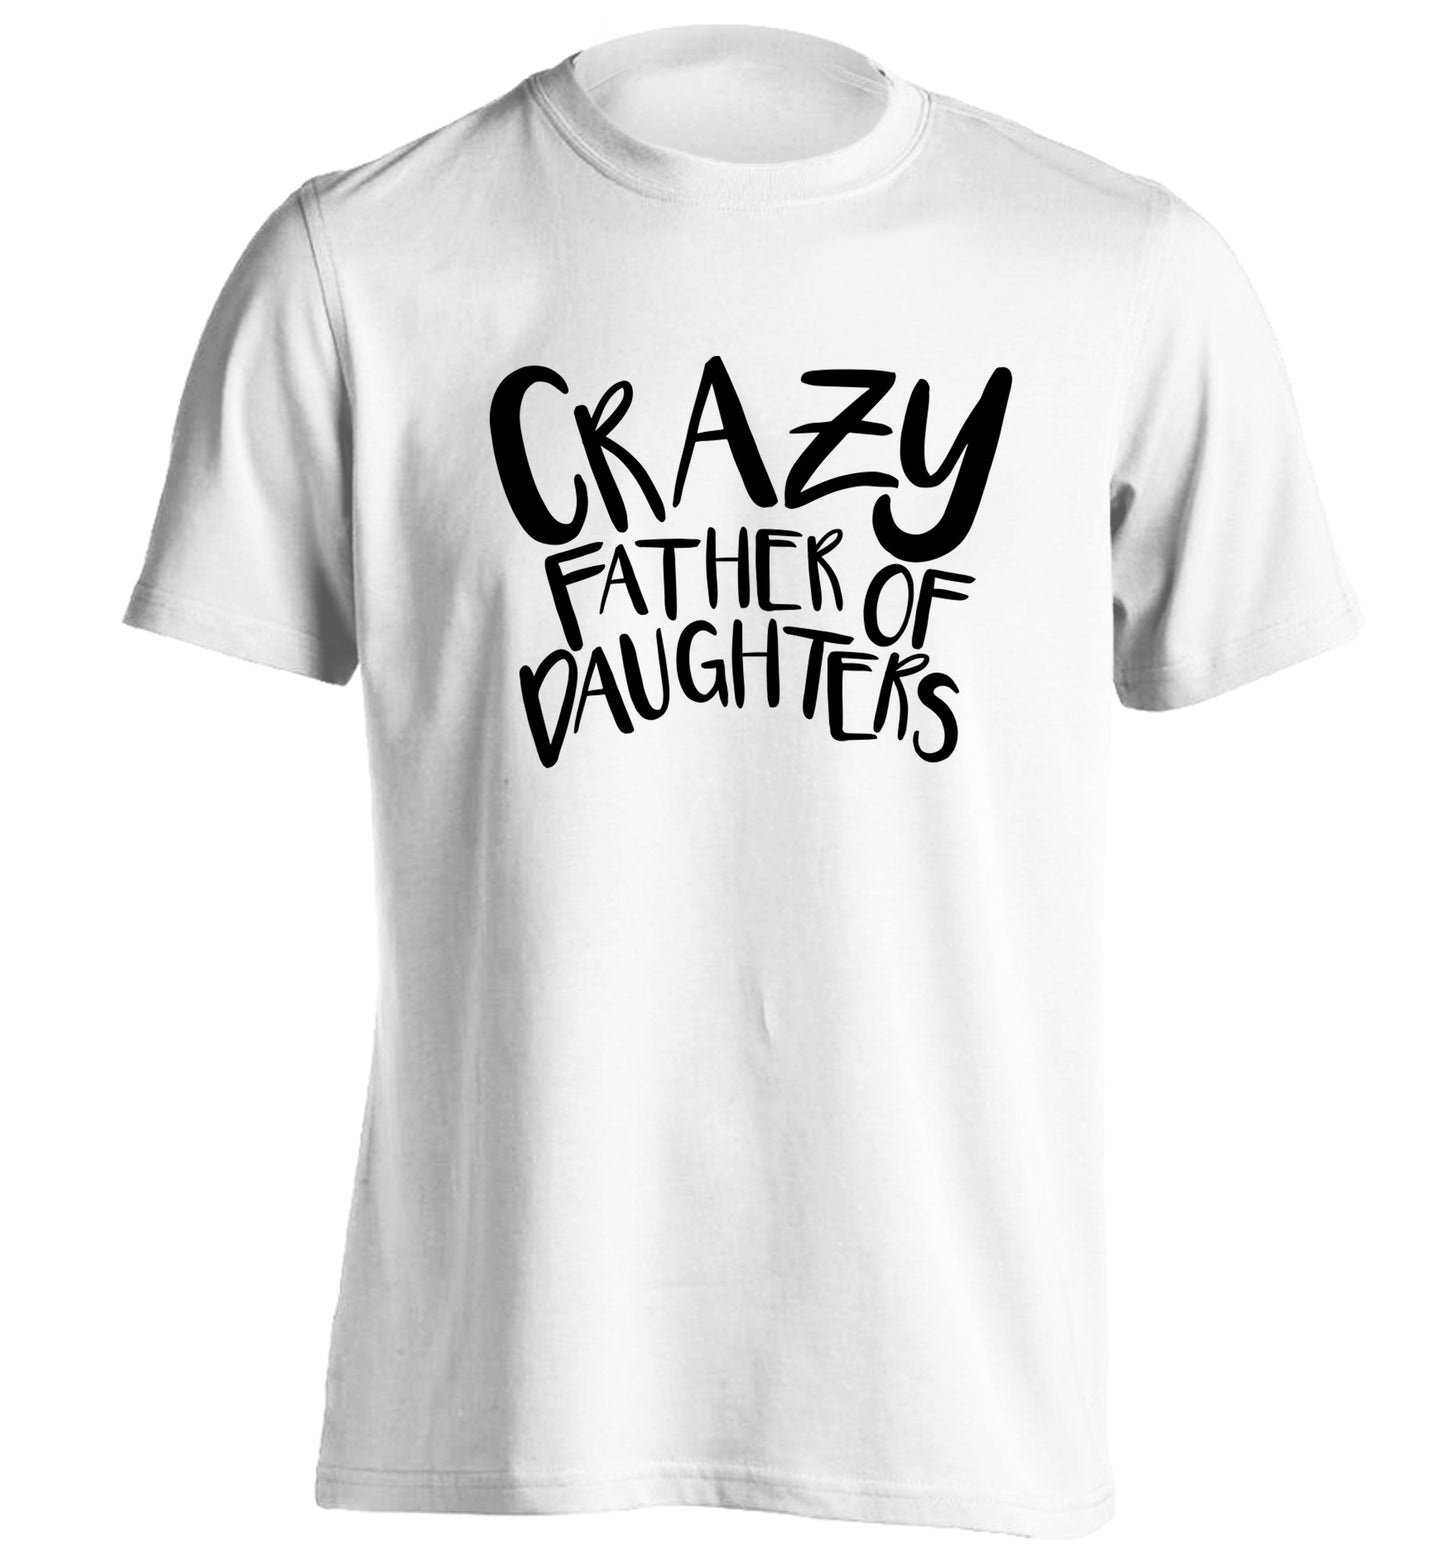 Crazy father of daughters adults unisex white Tshirt 2XL